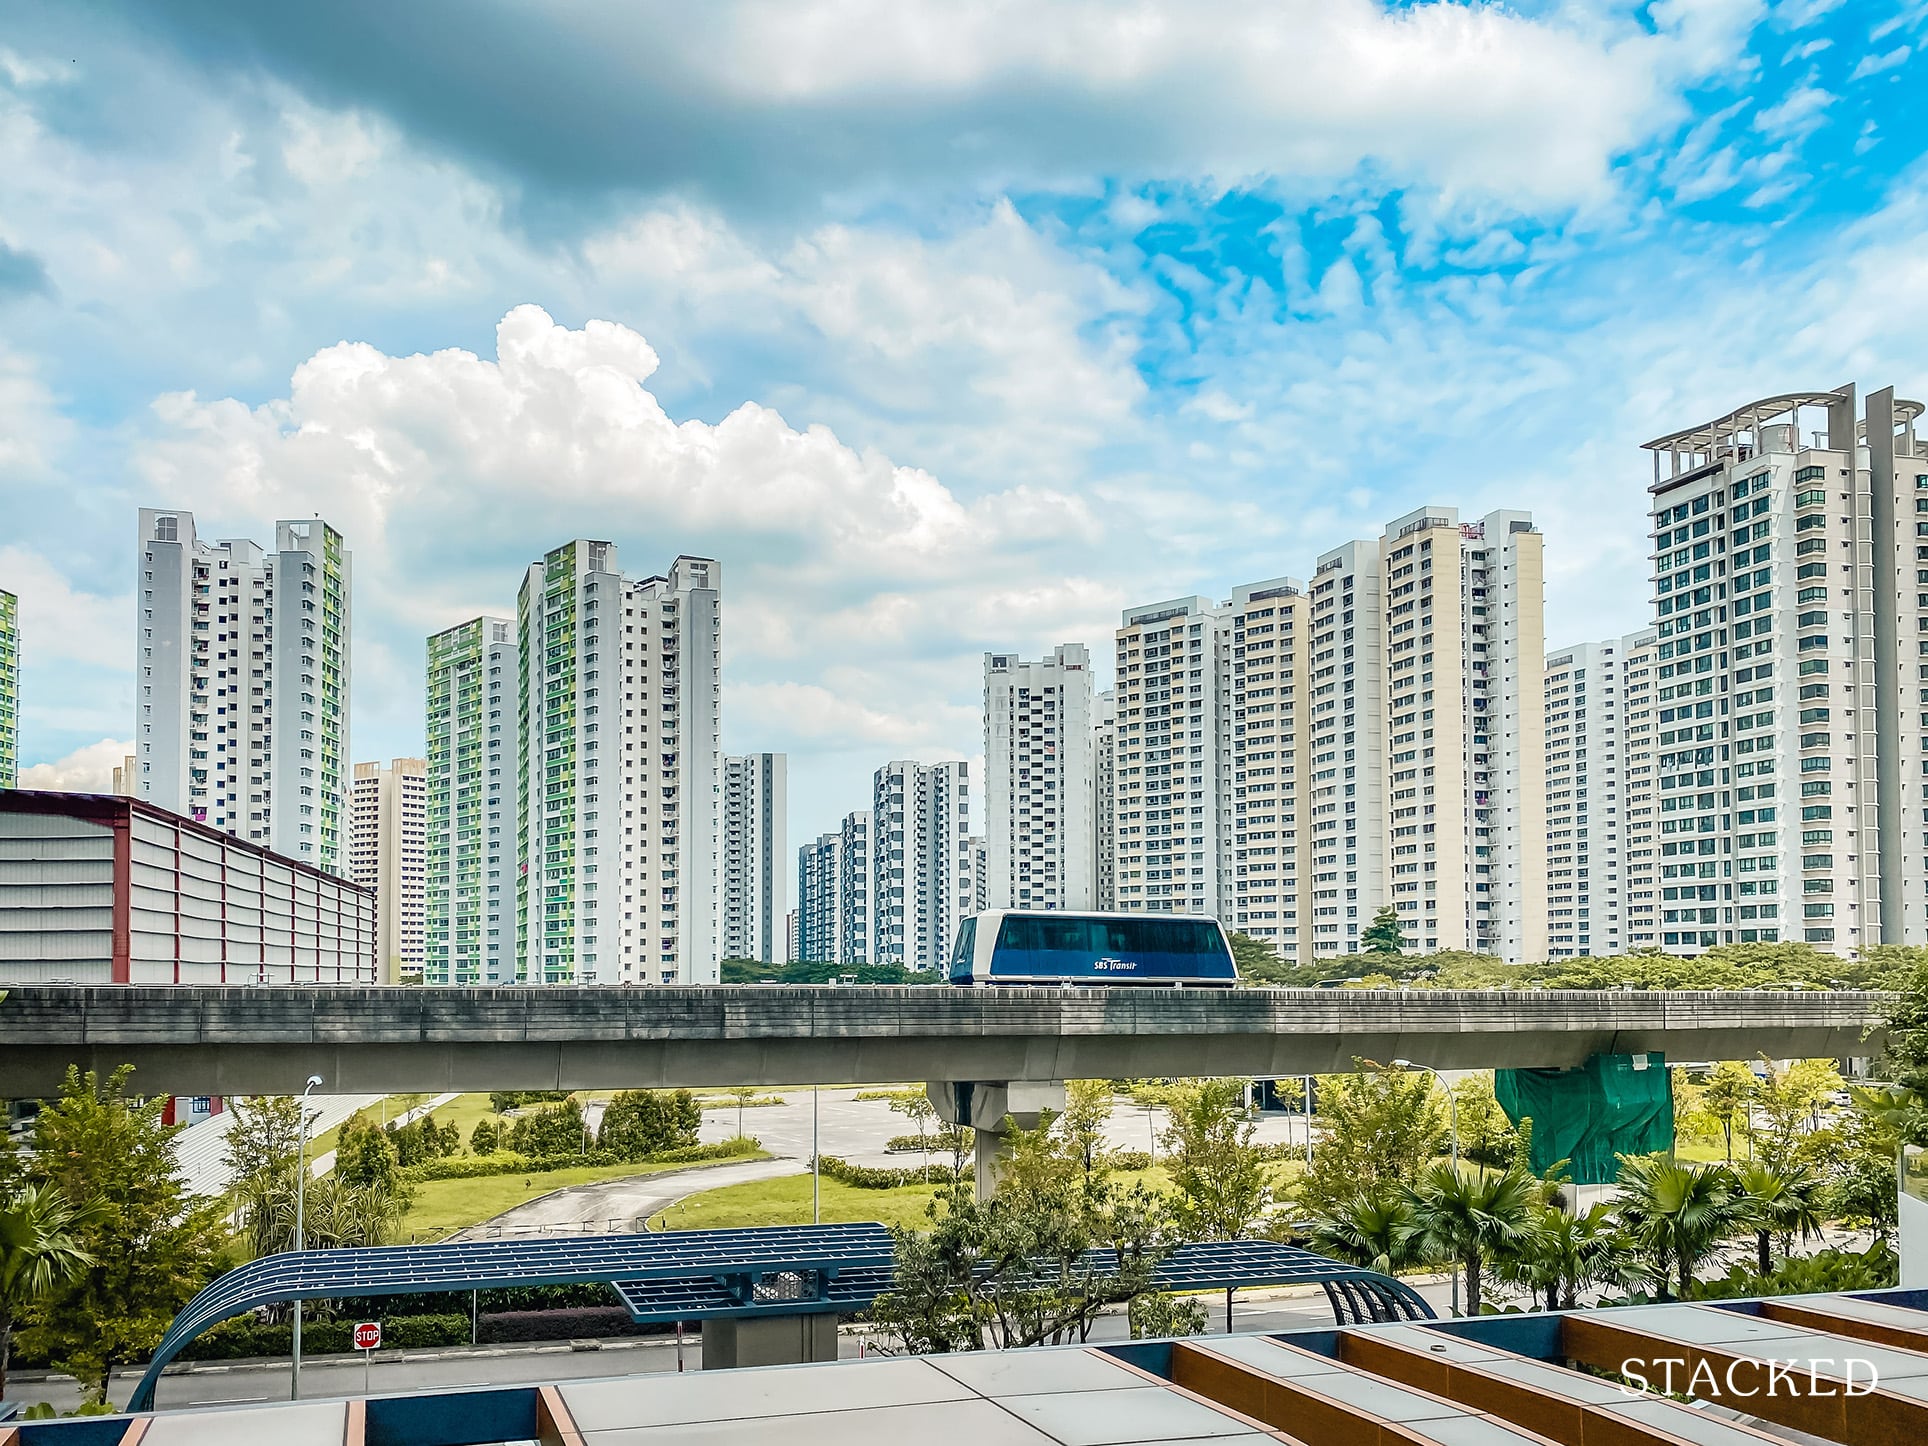 6 Things Foreign Investors Are Seldom Told About The Singapore Property Market